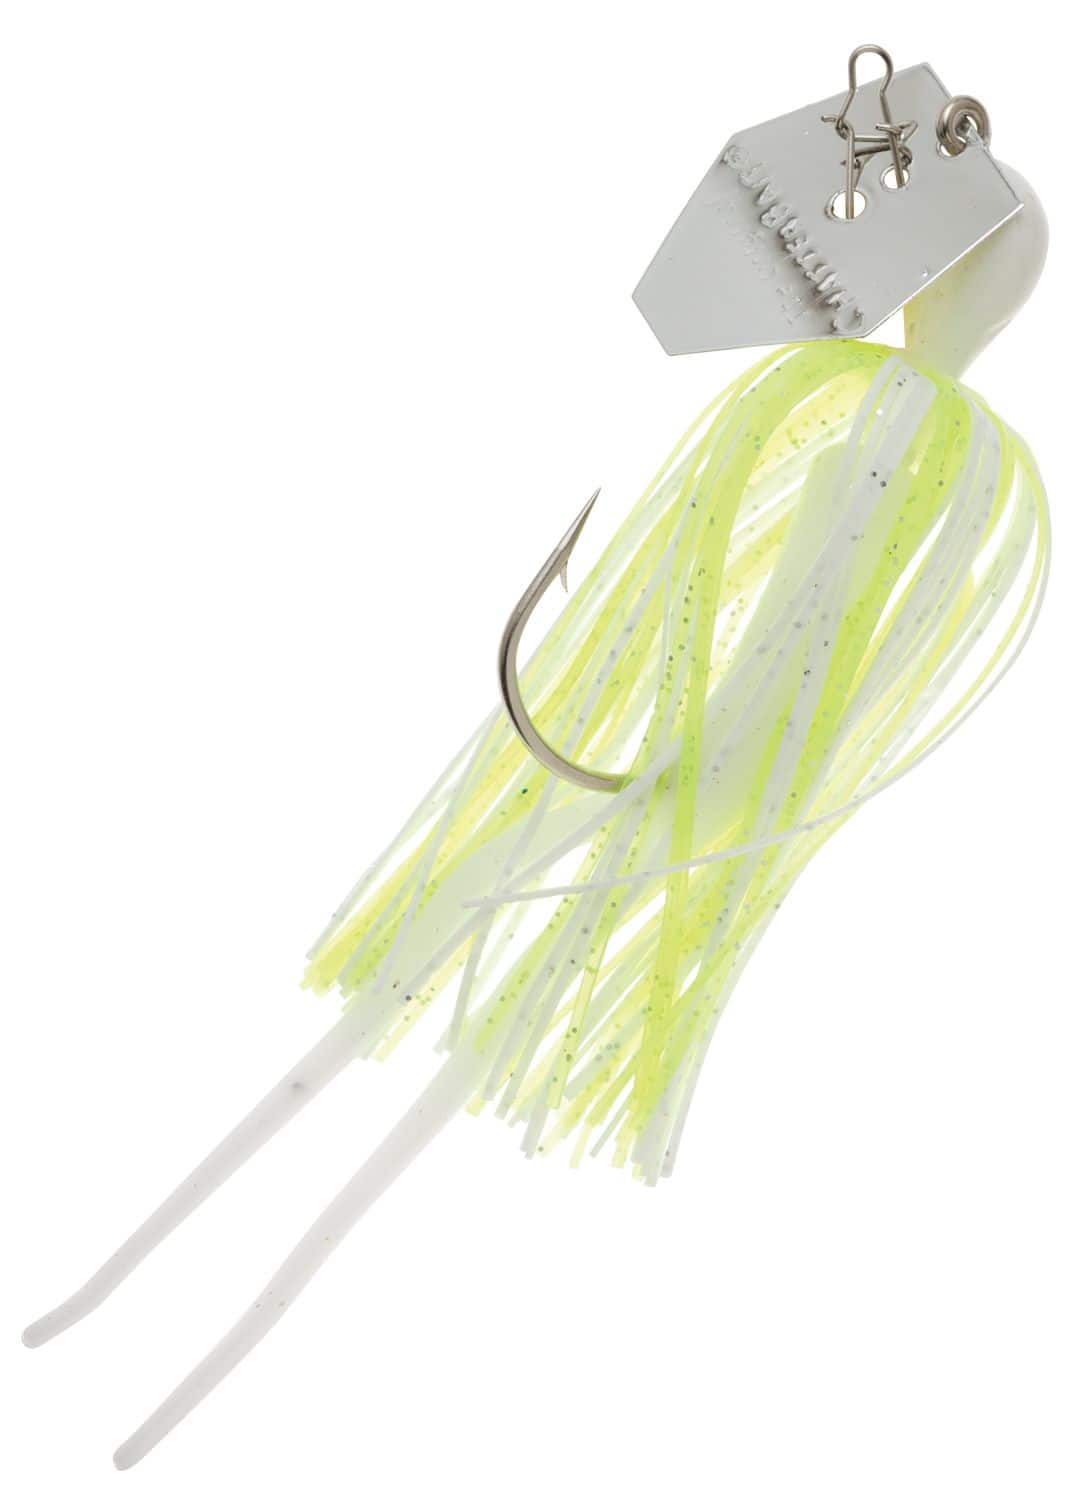 Z-Man ChatterBait Chatter Bait Original Lures, 3/8 oz, Candy Craw 